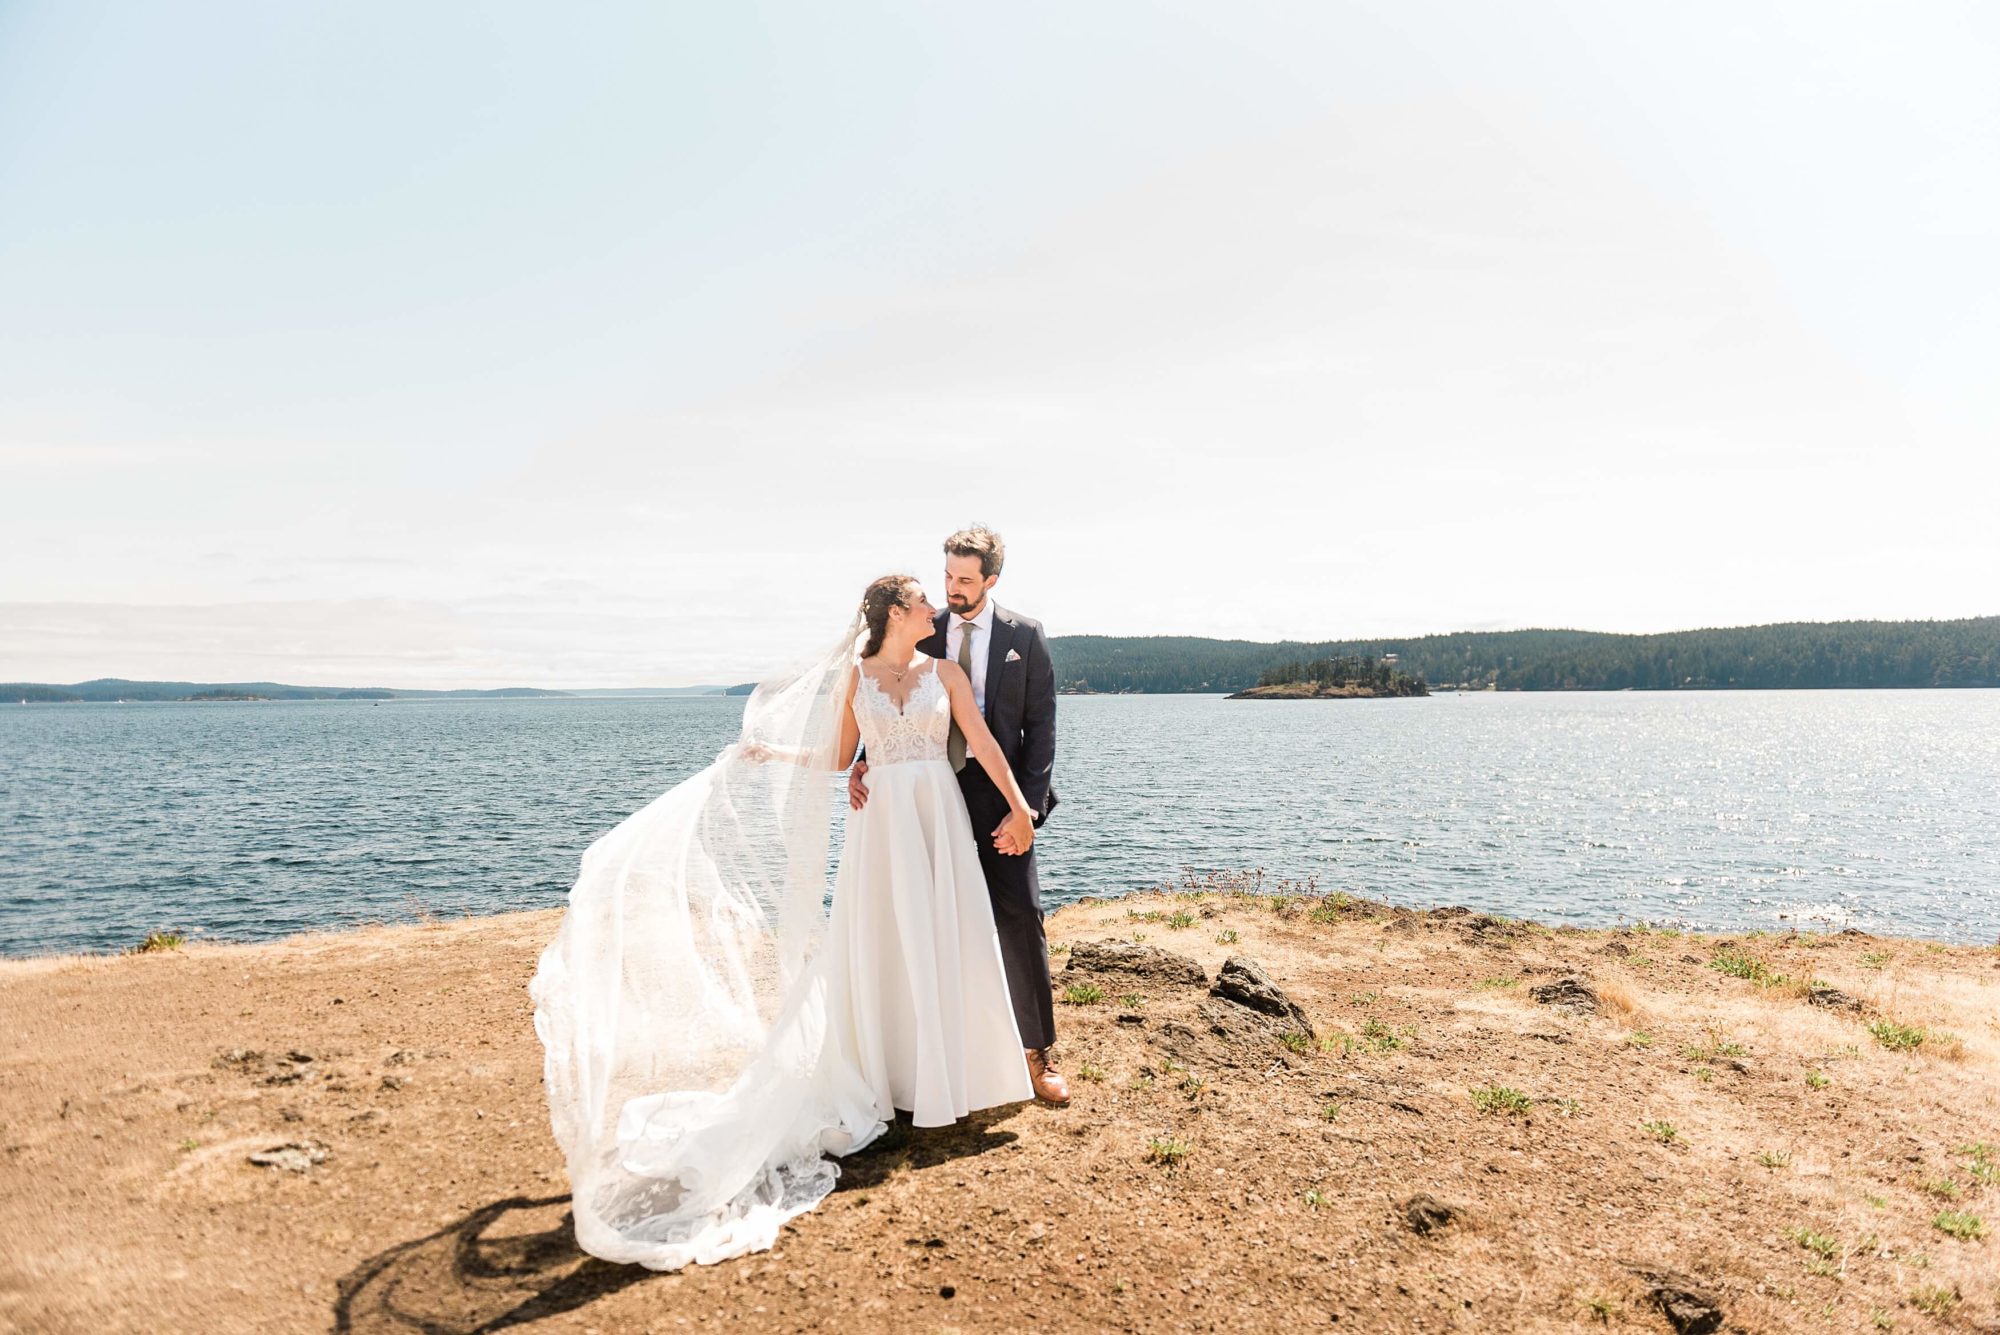 Bride and groom on a rocky beach in the San Juan Islands